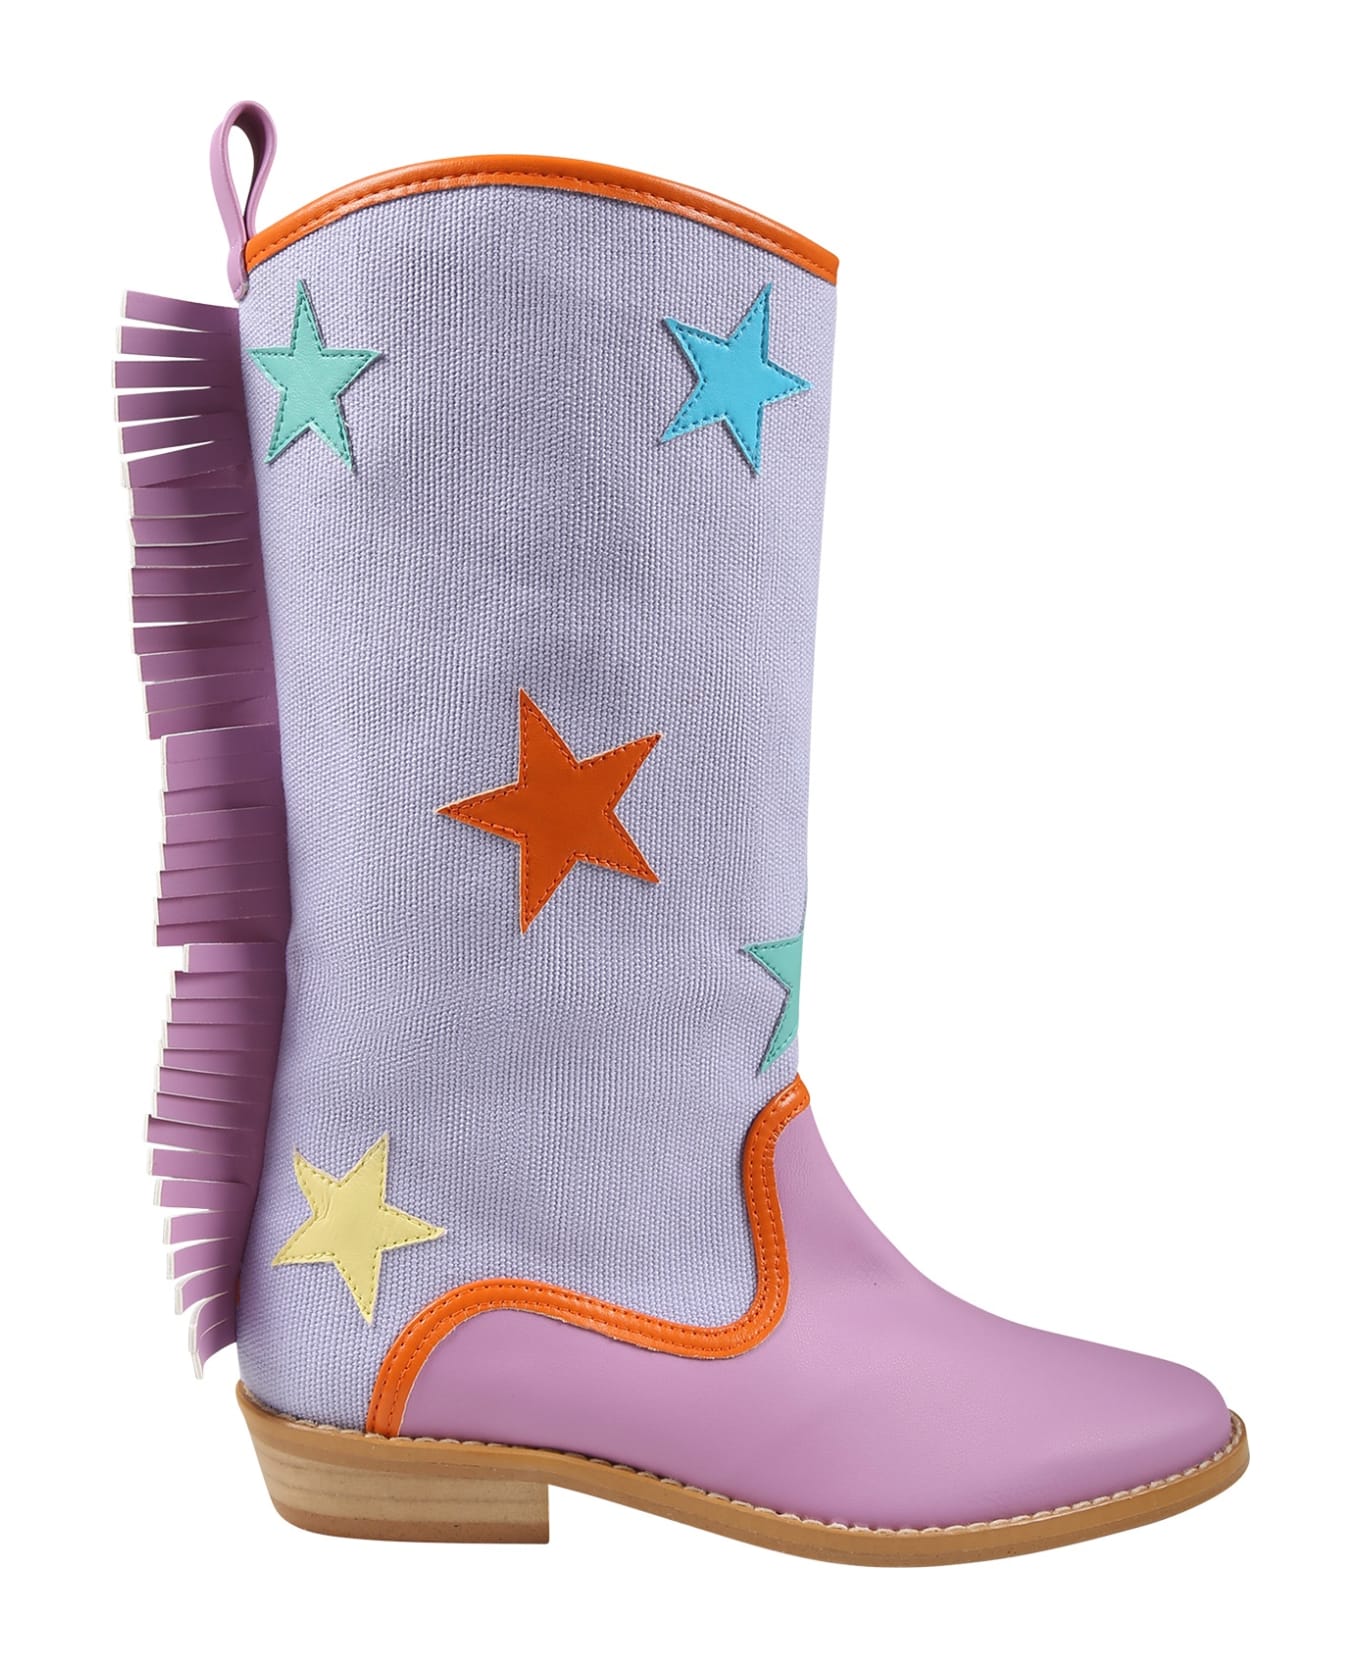 Stella McCartney Kids Puple Boots For Girl With Stars - Violet